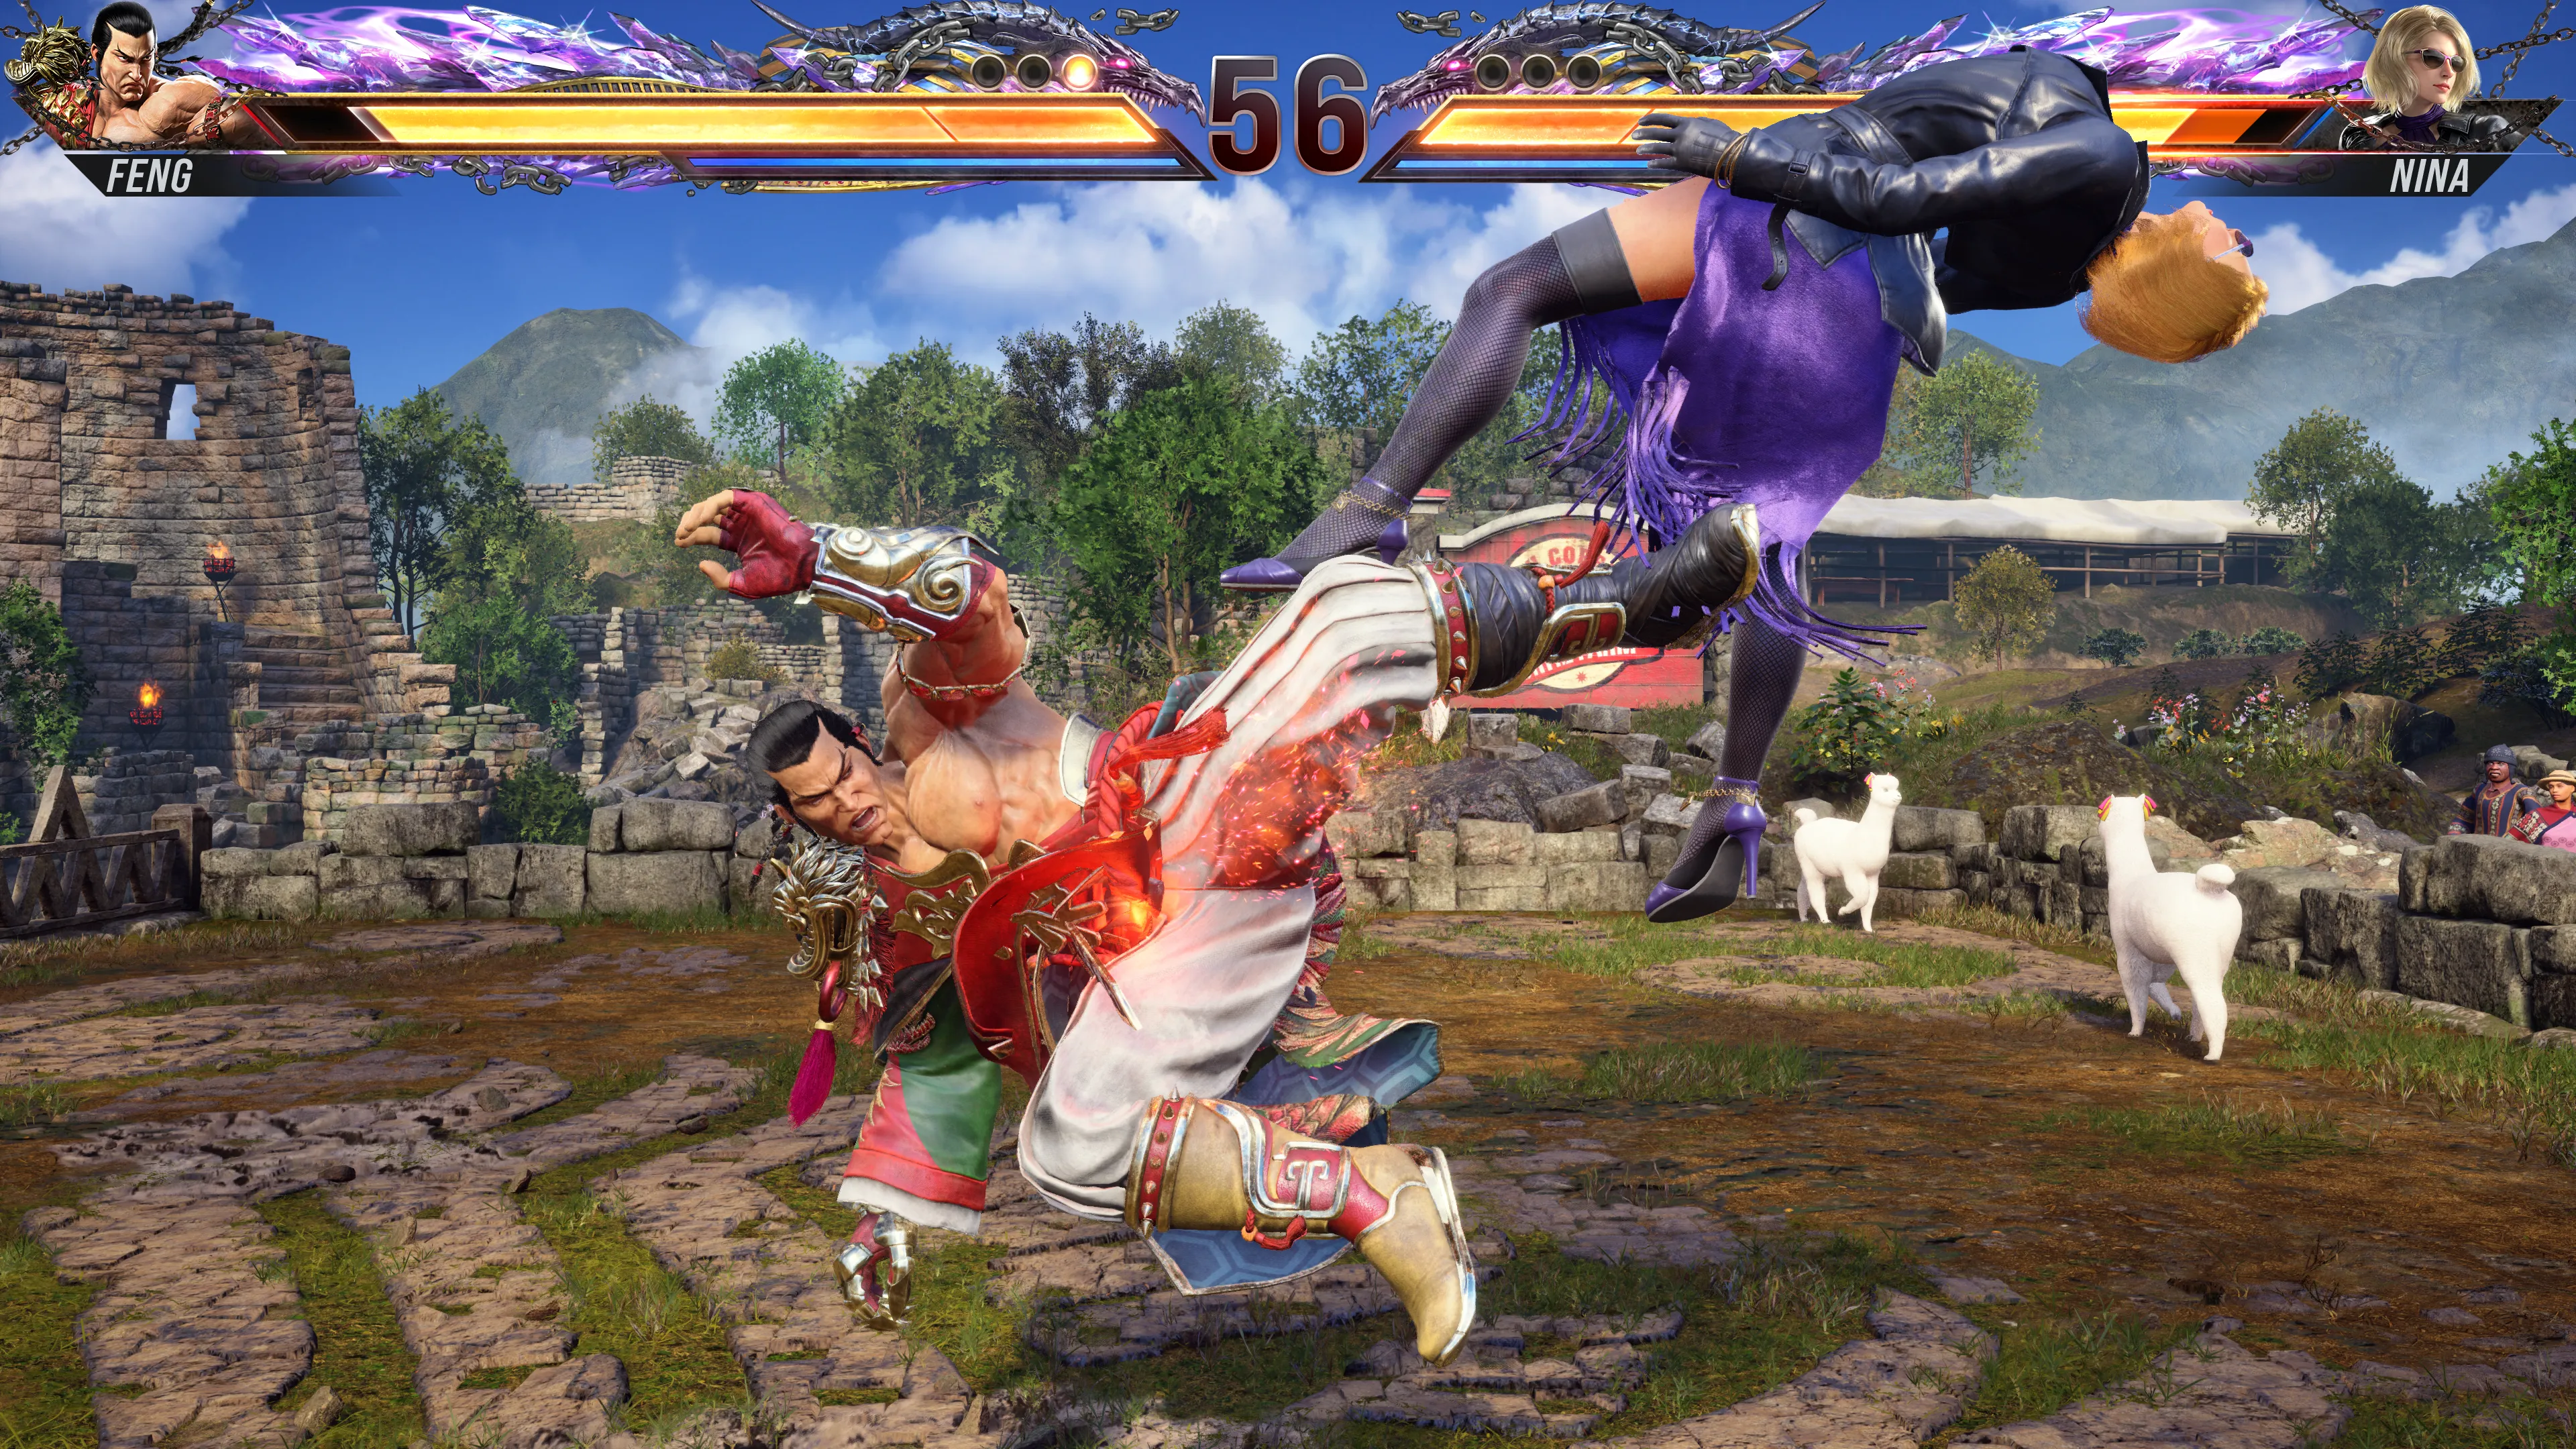 Feng launching Nina with a rising kick from his Lingering Shadow Stance in Tekken 8